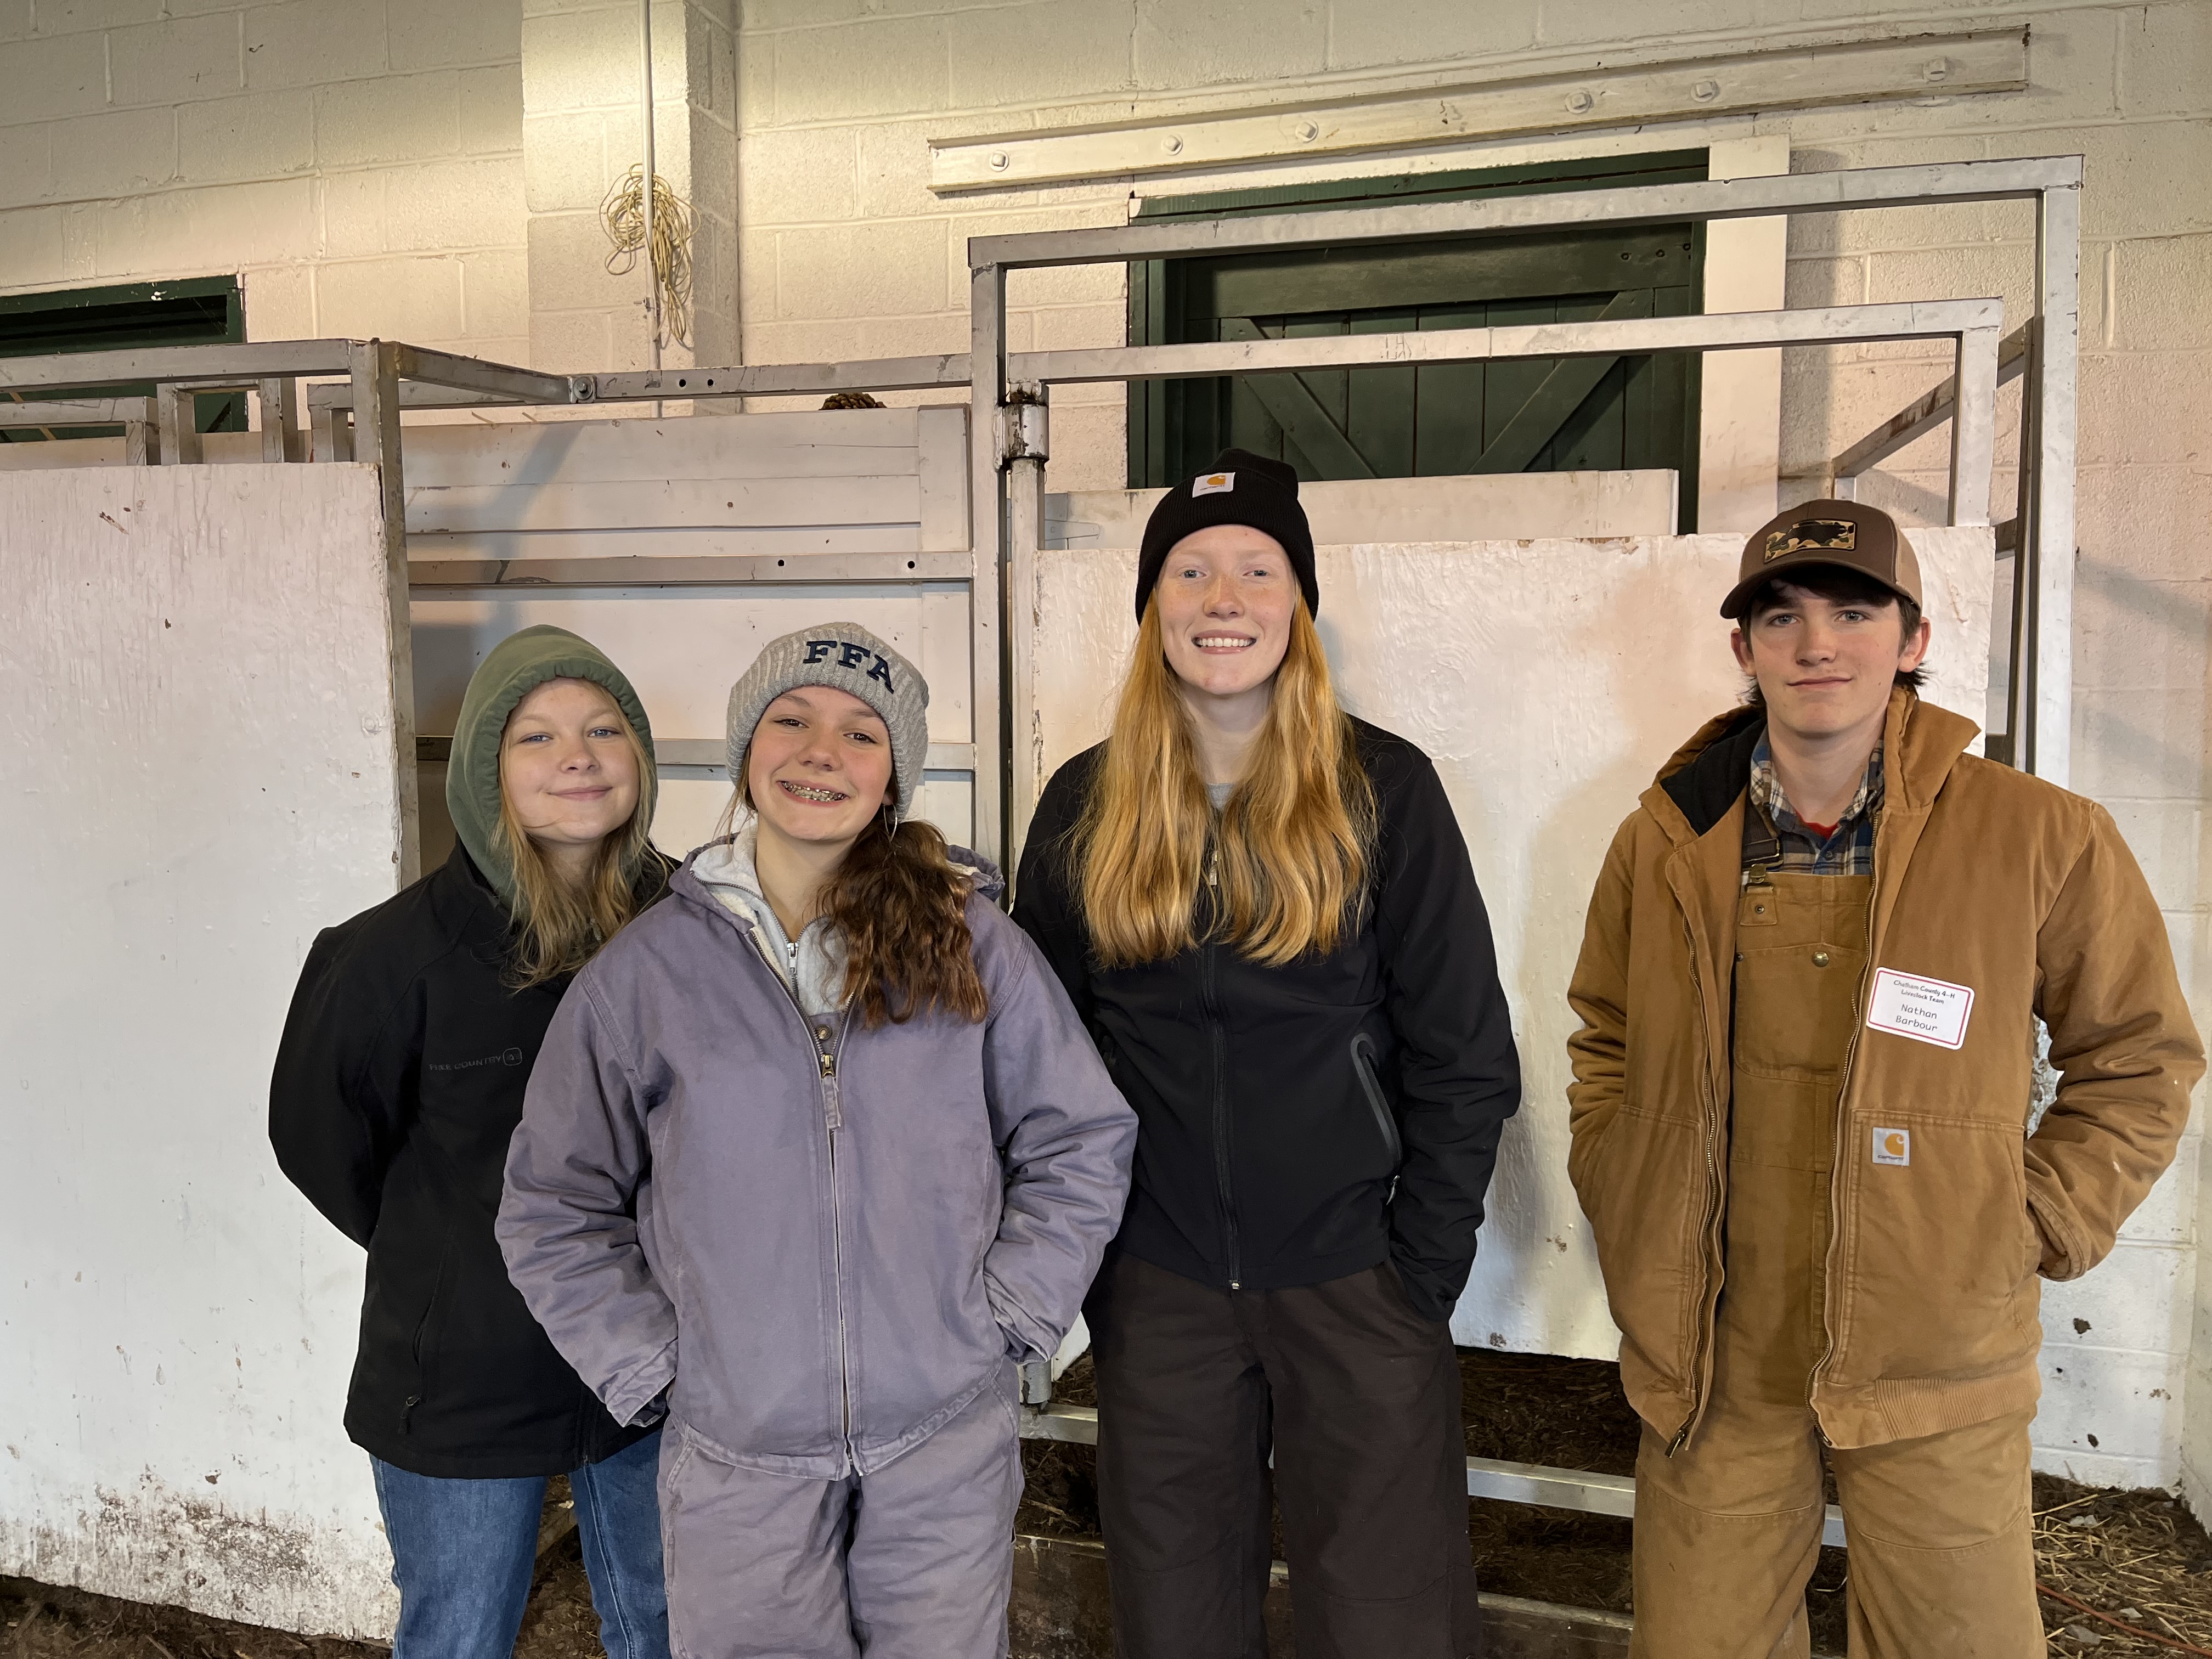 Four teenagers pose in front of a metal structure in a barn.